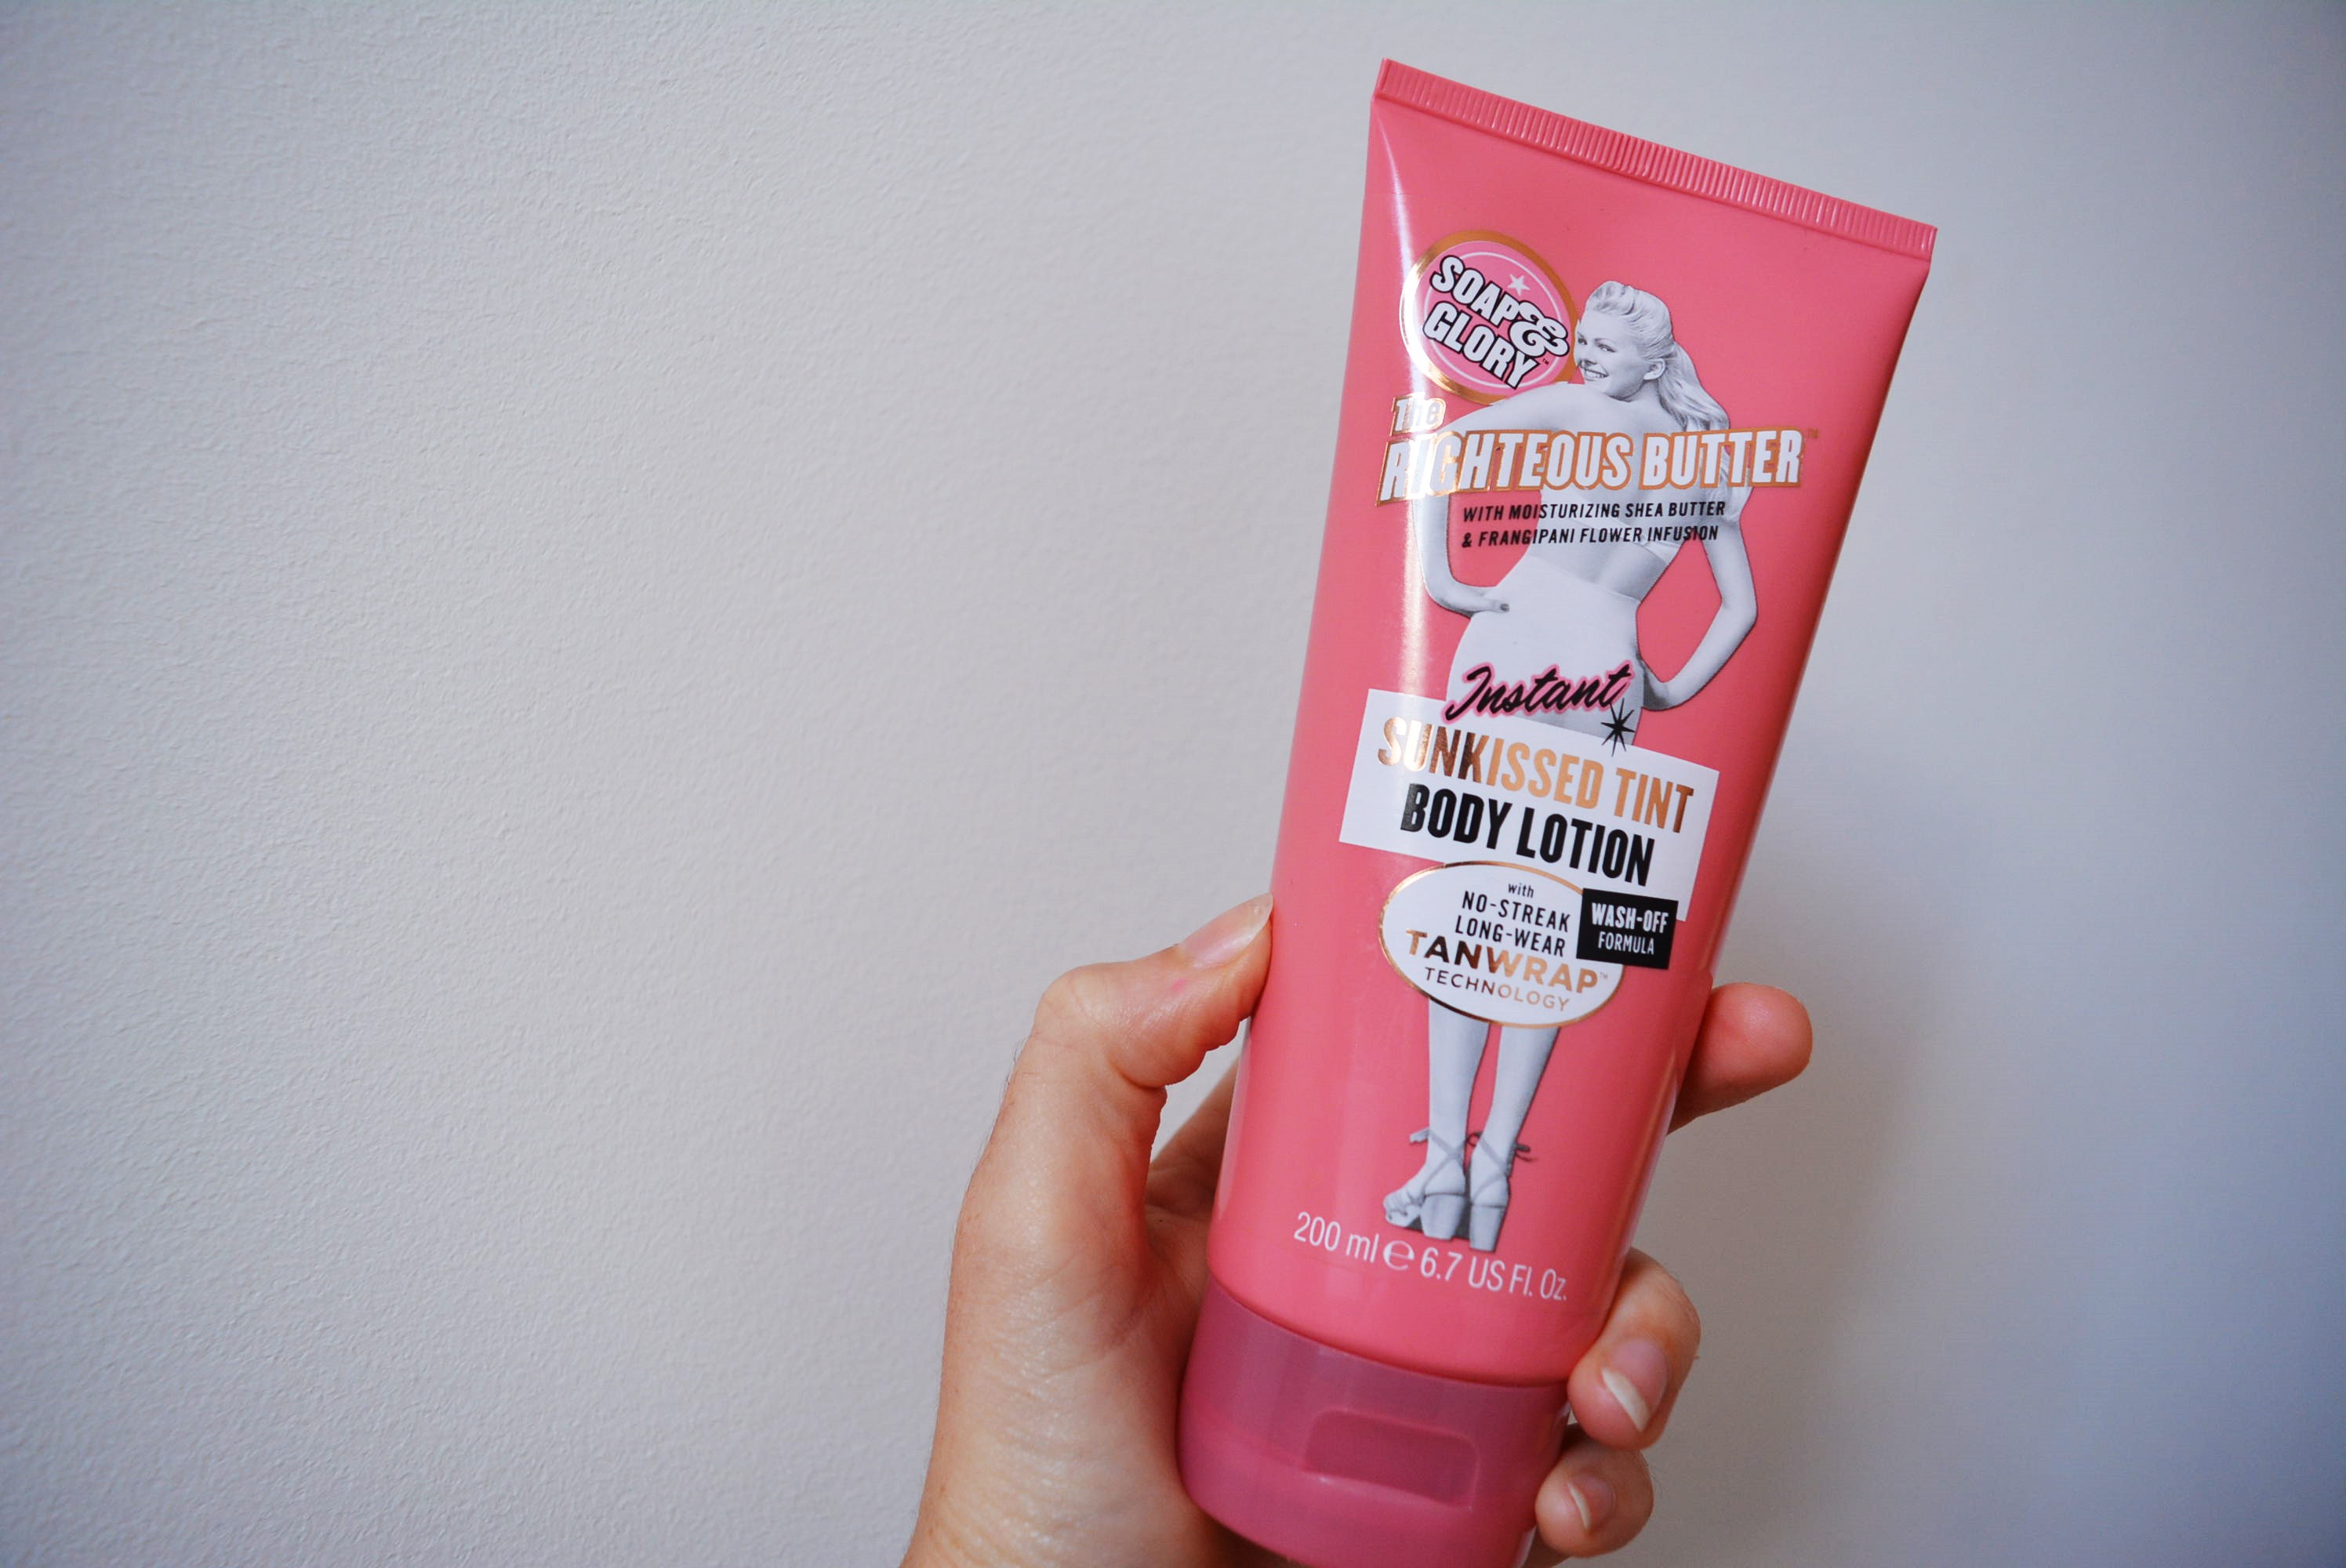 soap and glory instant tan review